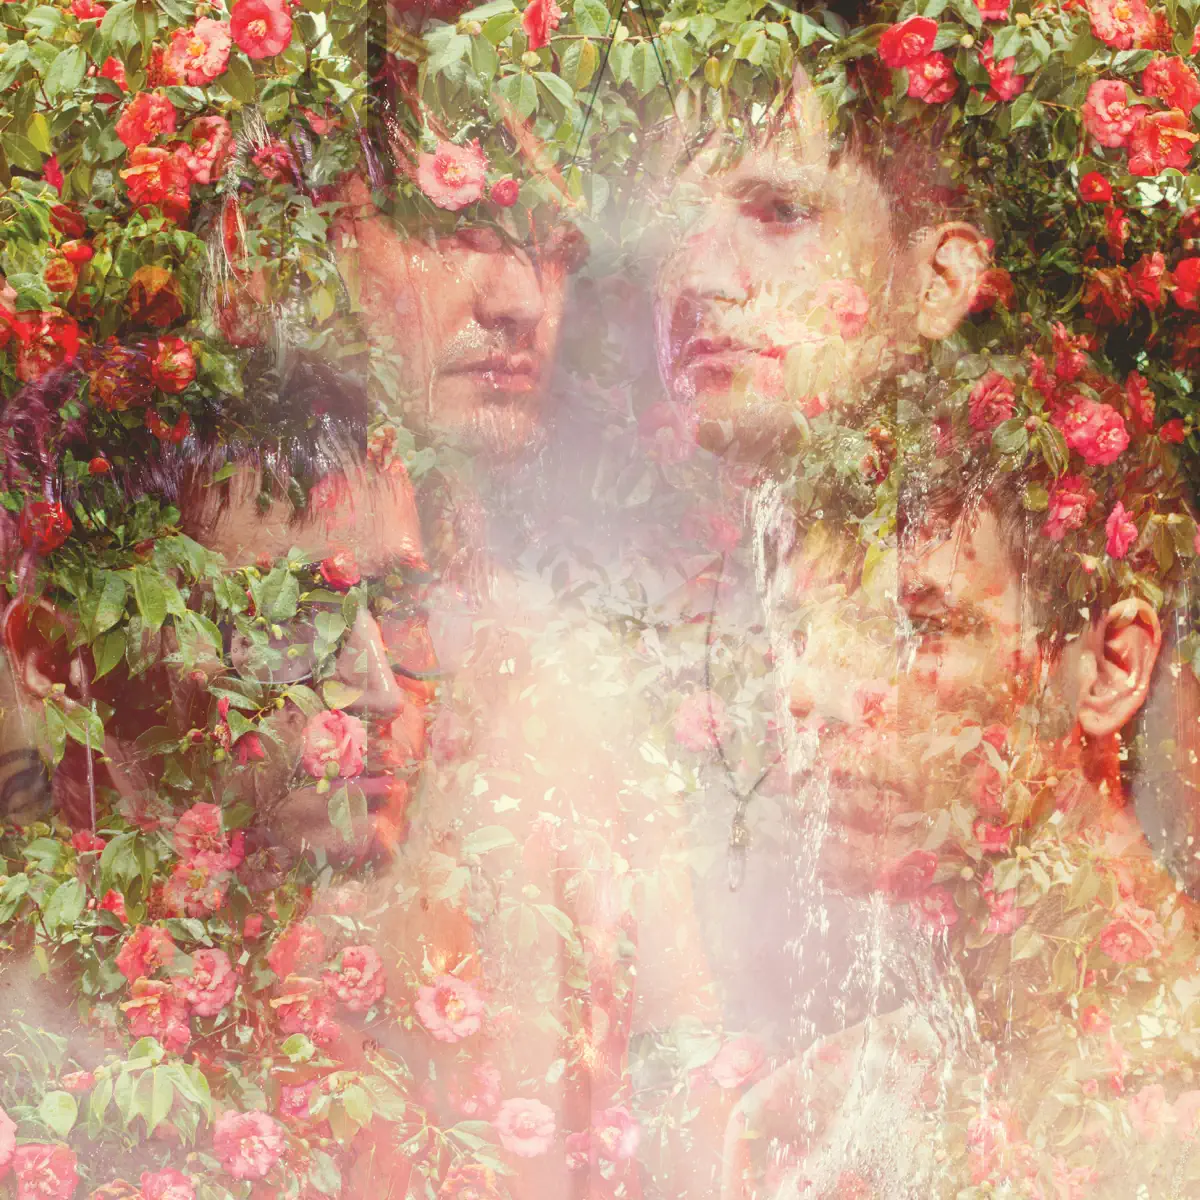 STRFKR - Miracle Mile (2013) [iTunes Plus AAC M4A]-新房子